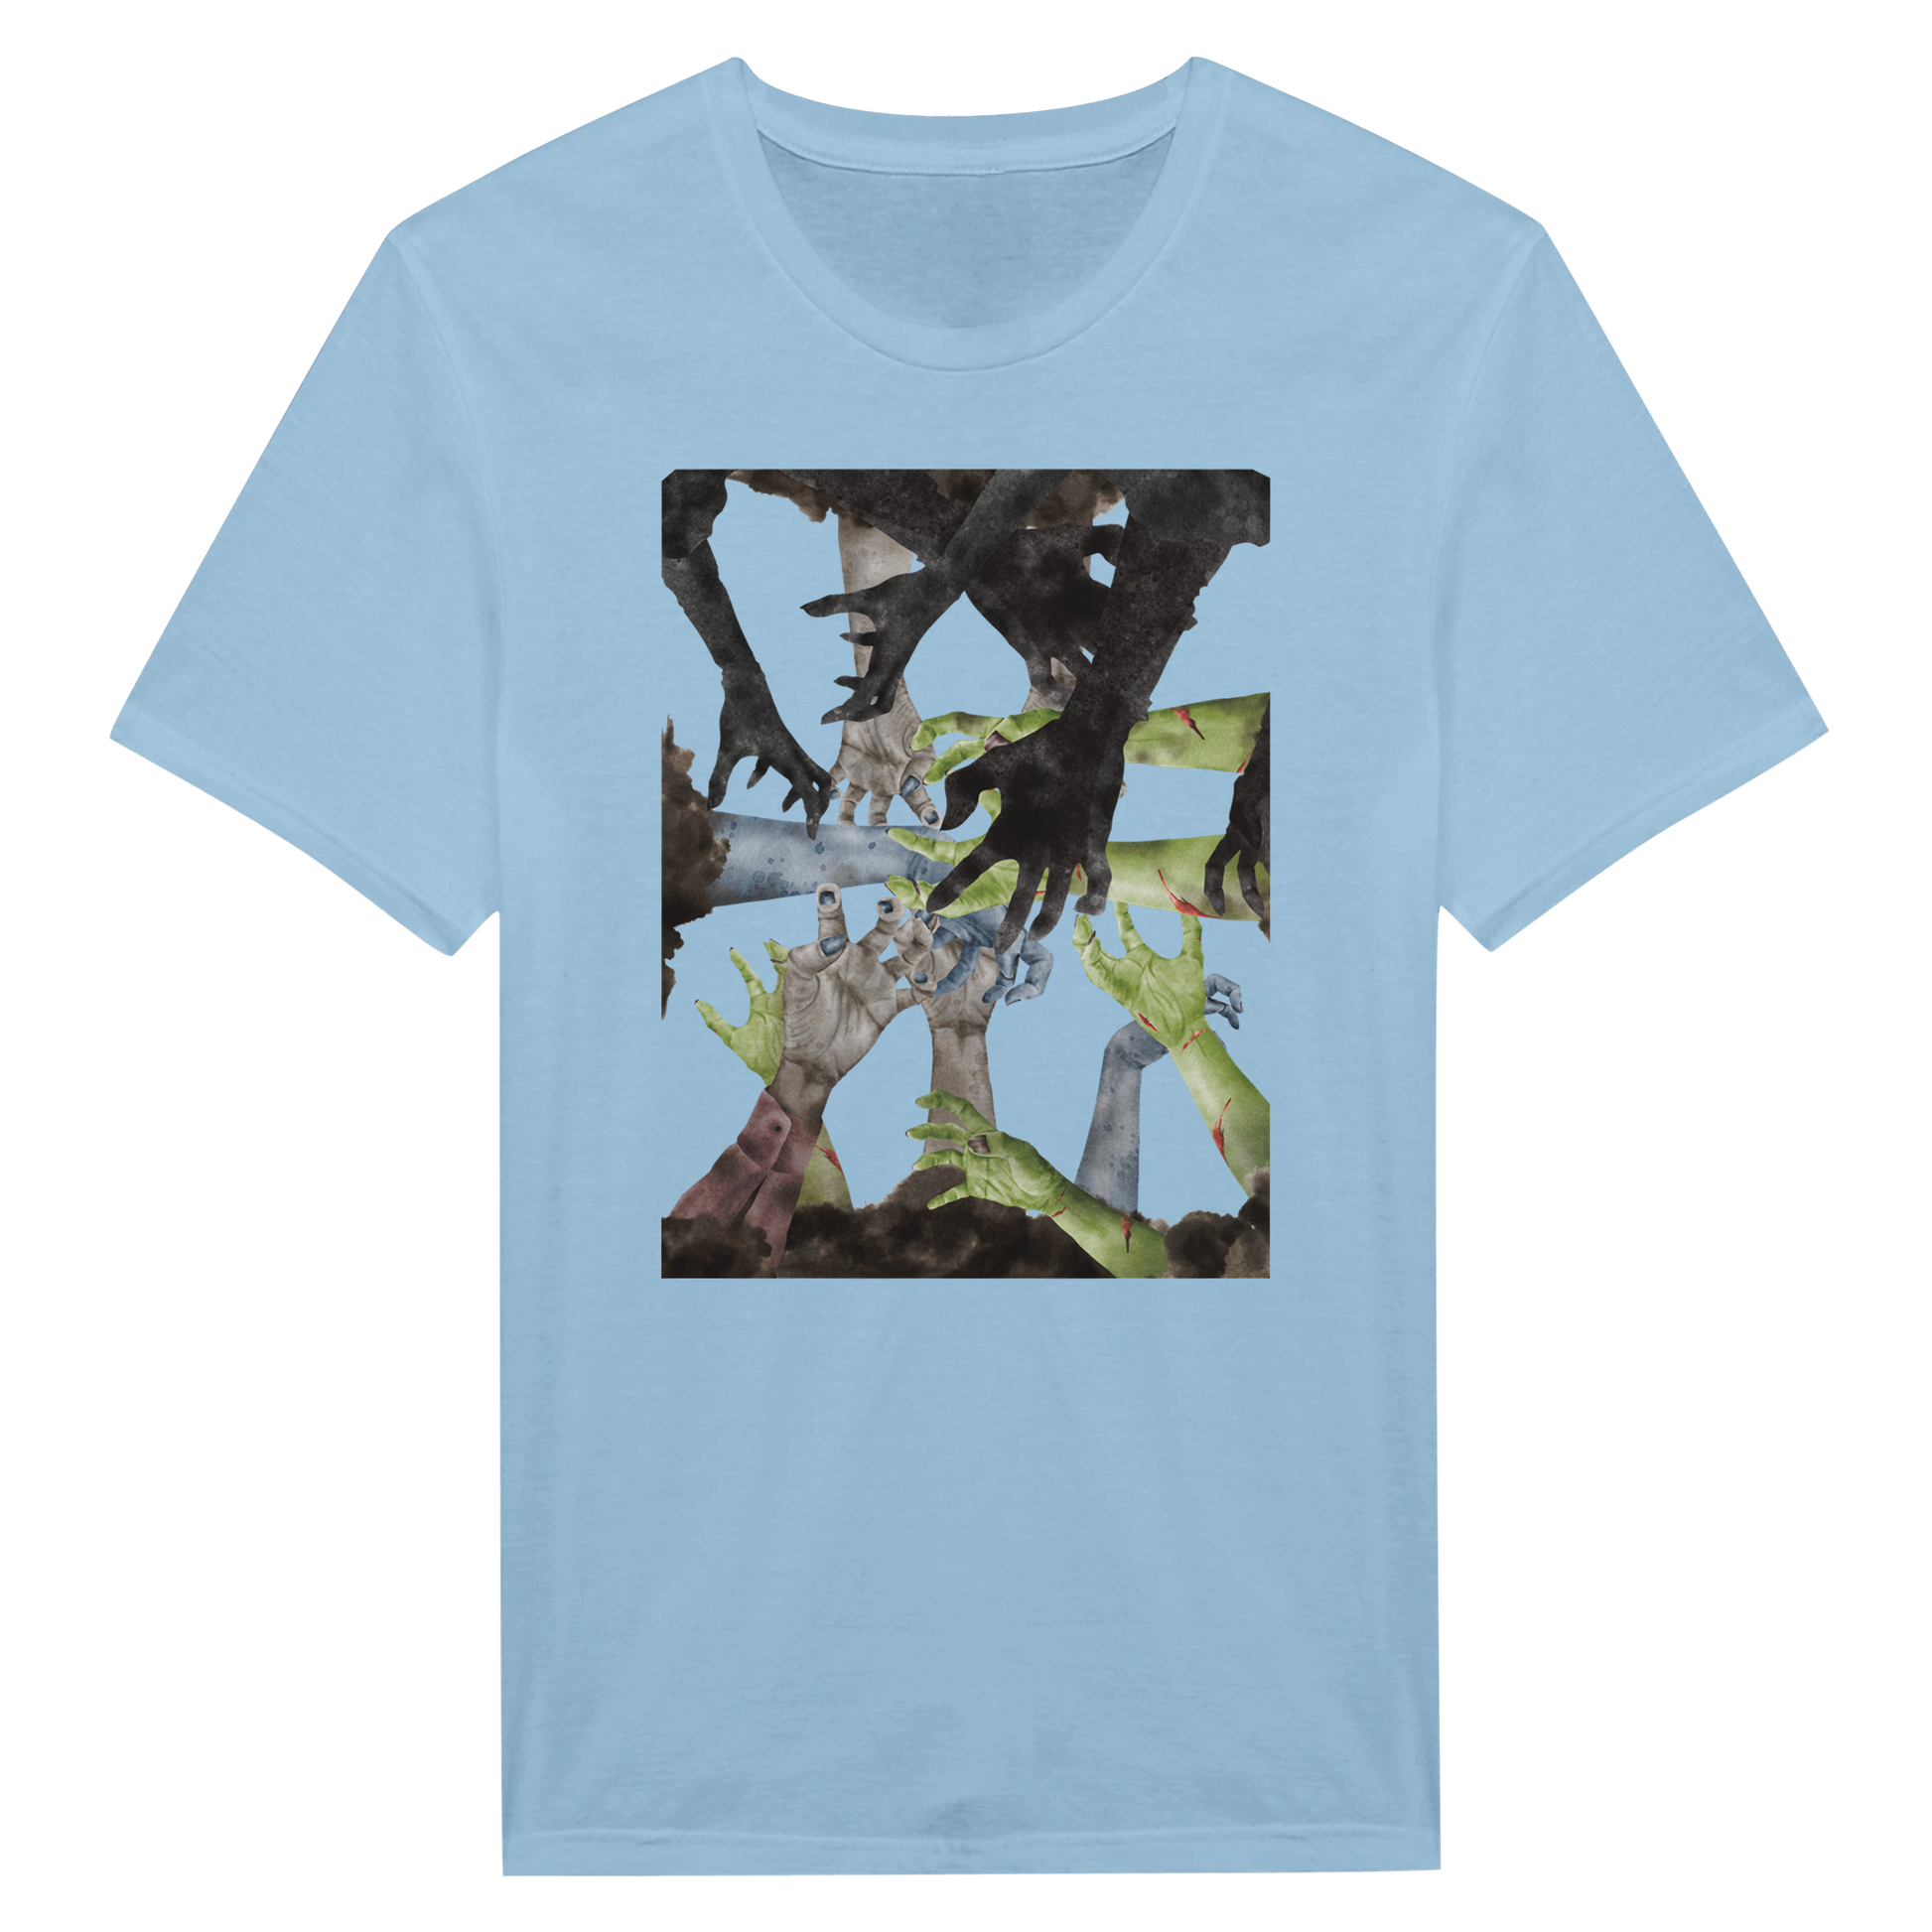 Light Blue Tee Shirt with zombie hands reaching in the center.